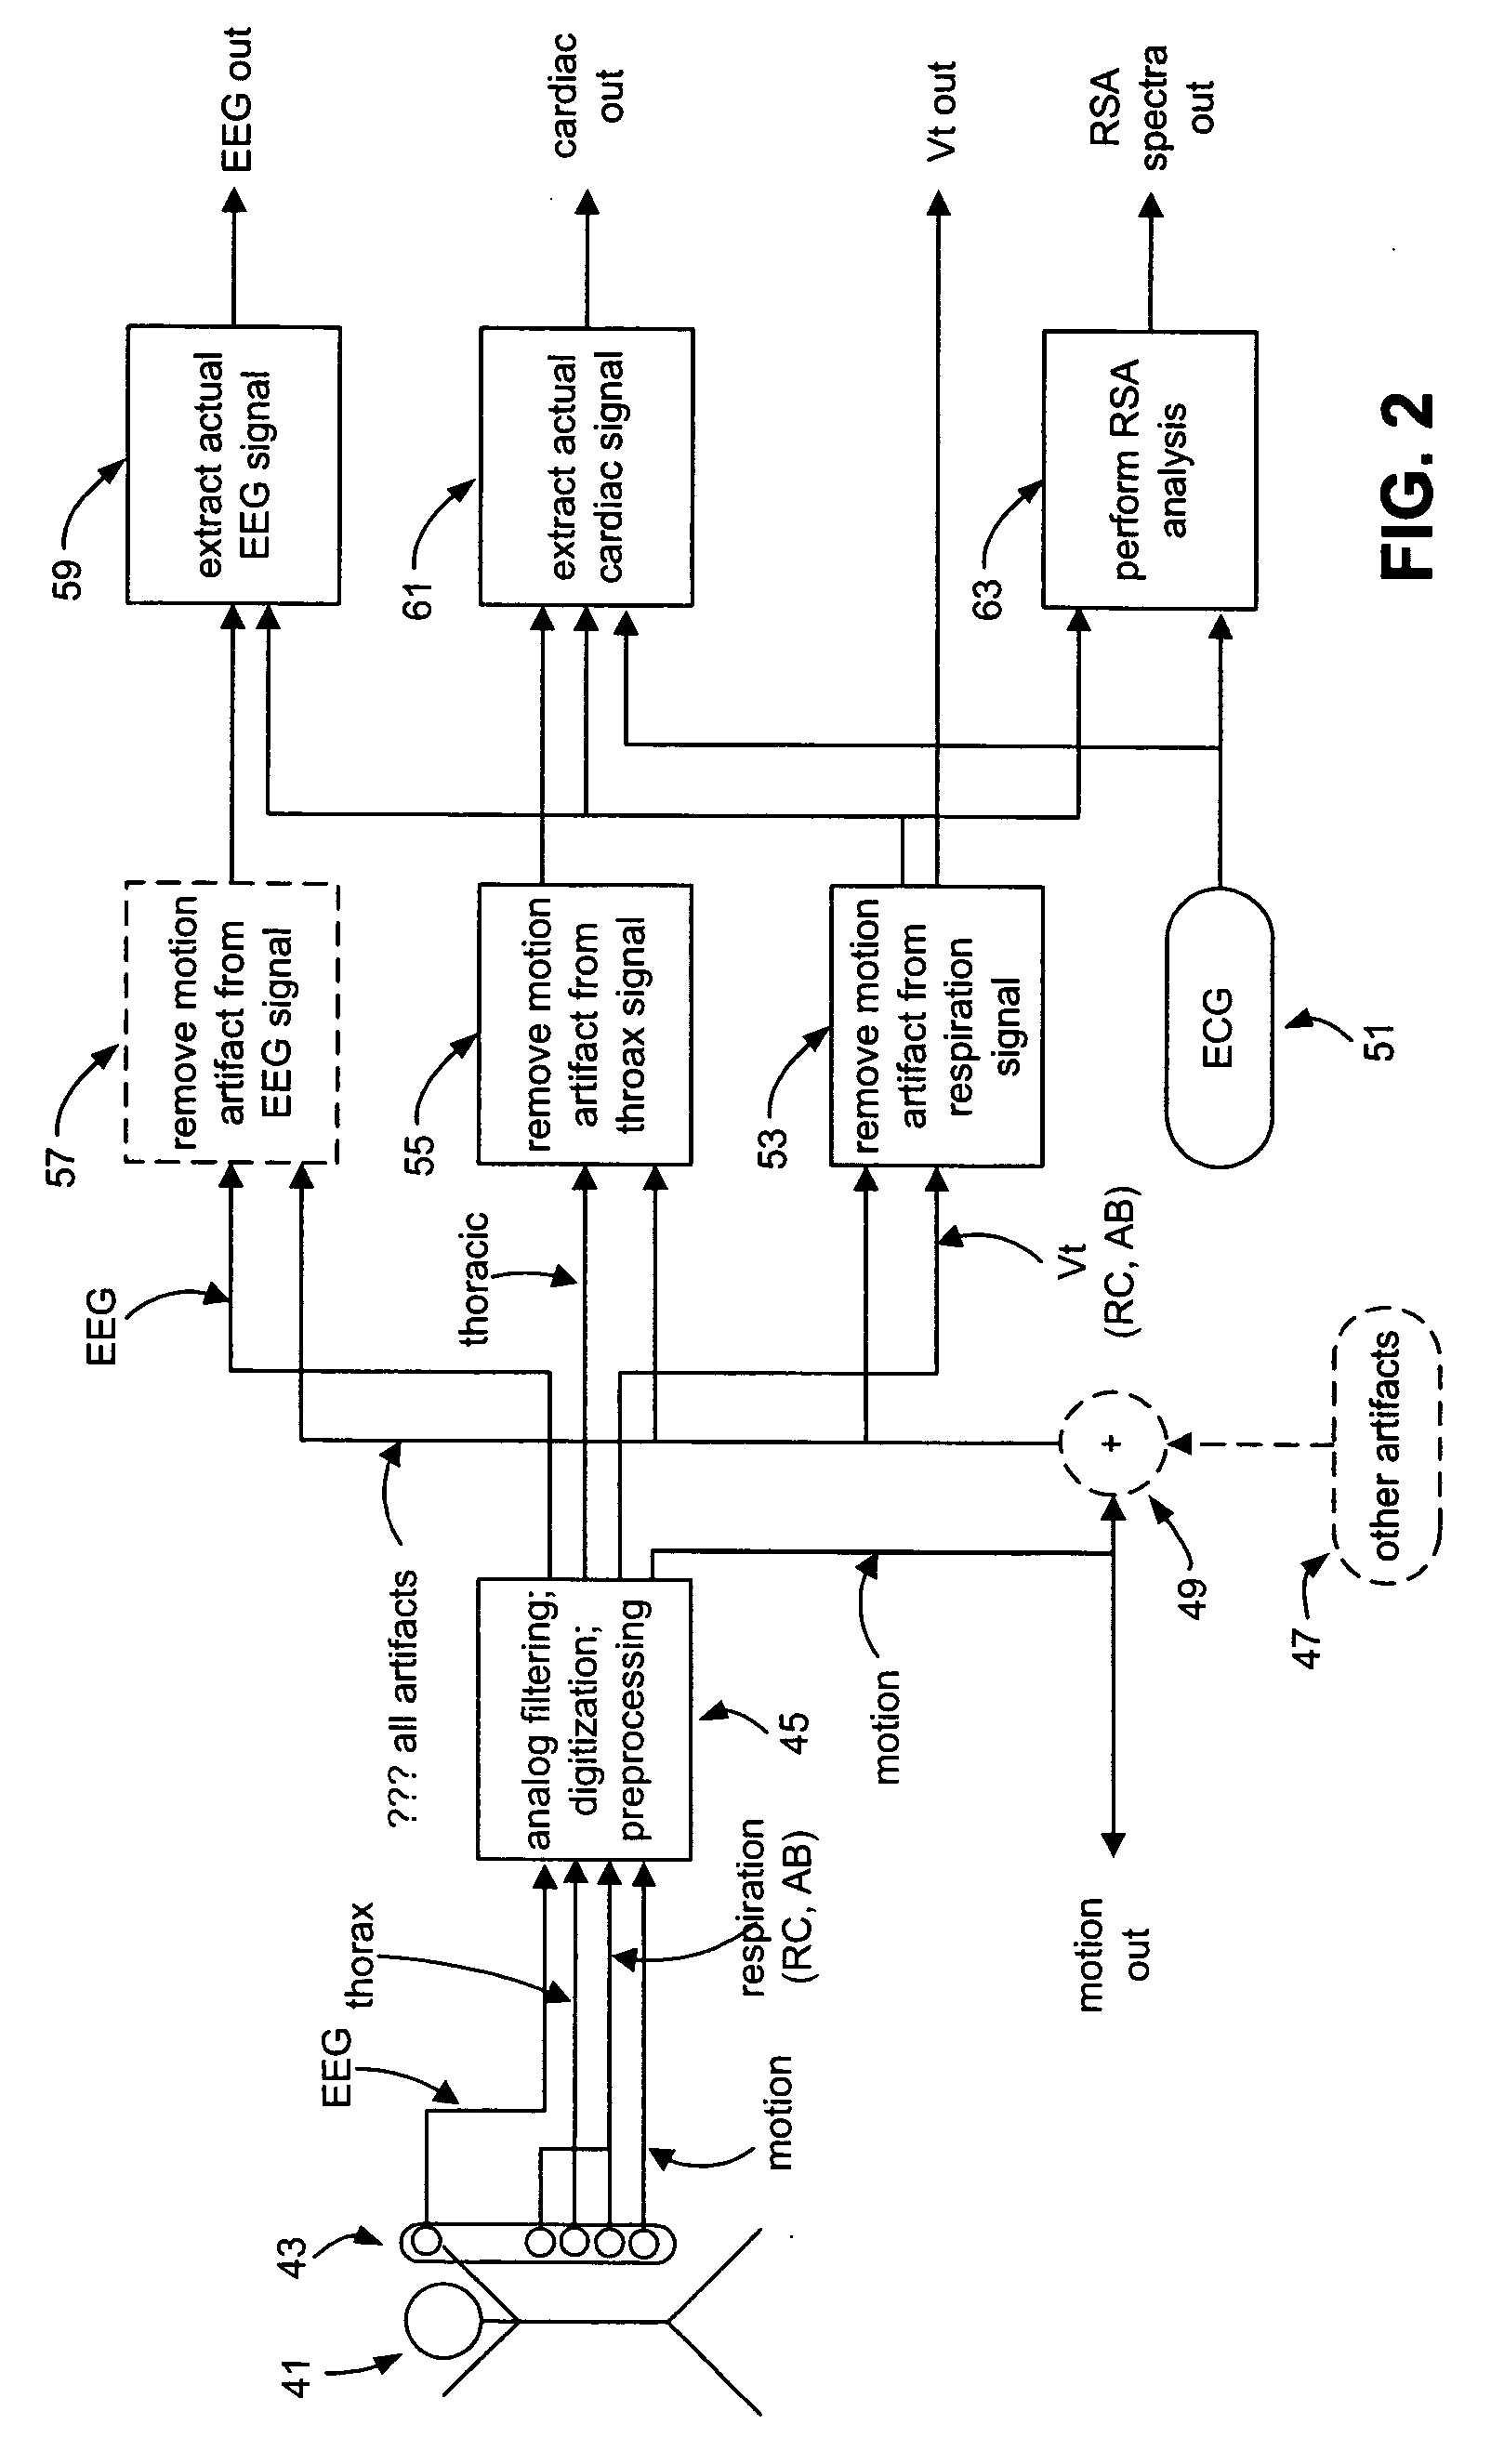 Method and system for processing data from ambulatory physiological monitoring